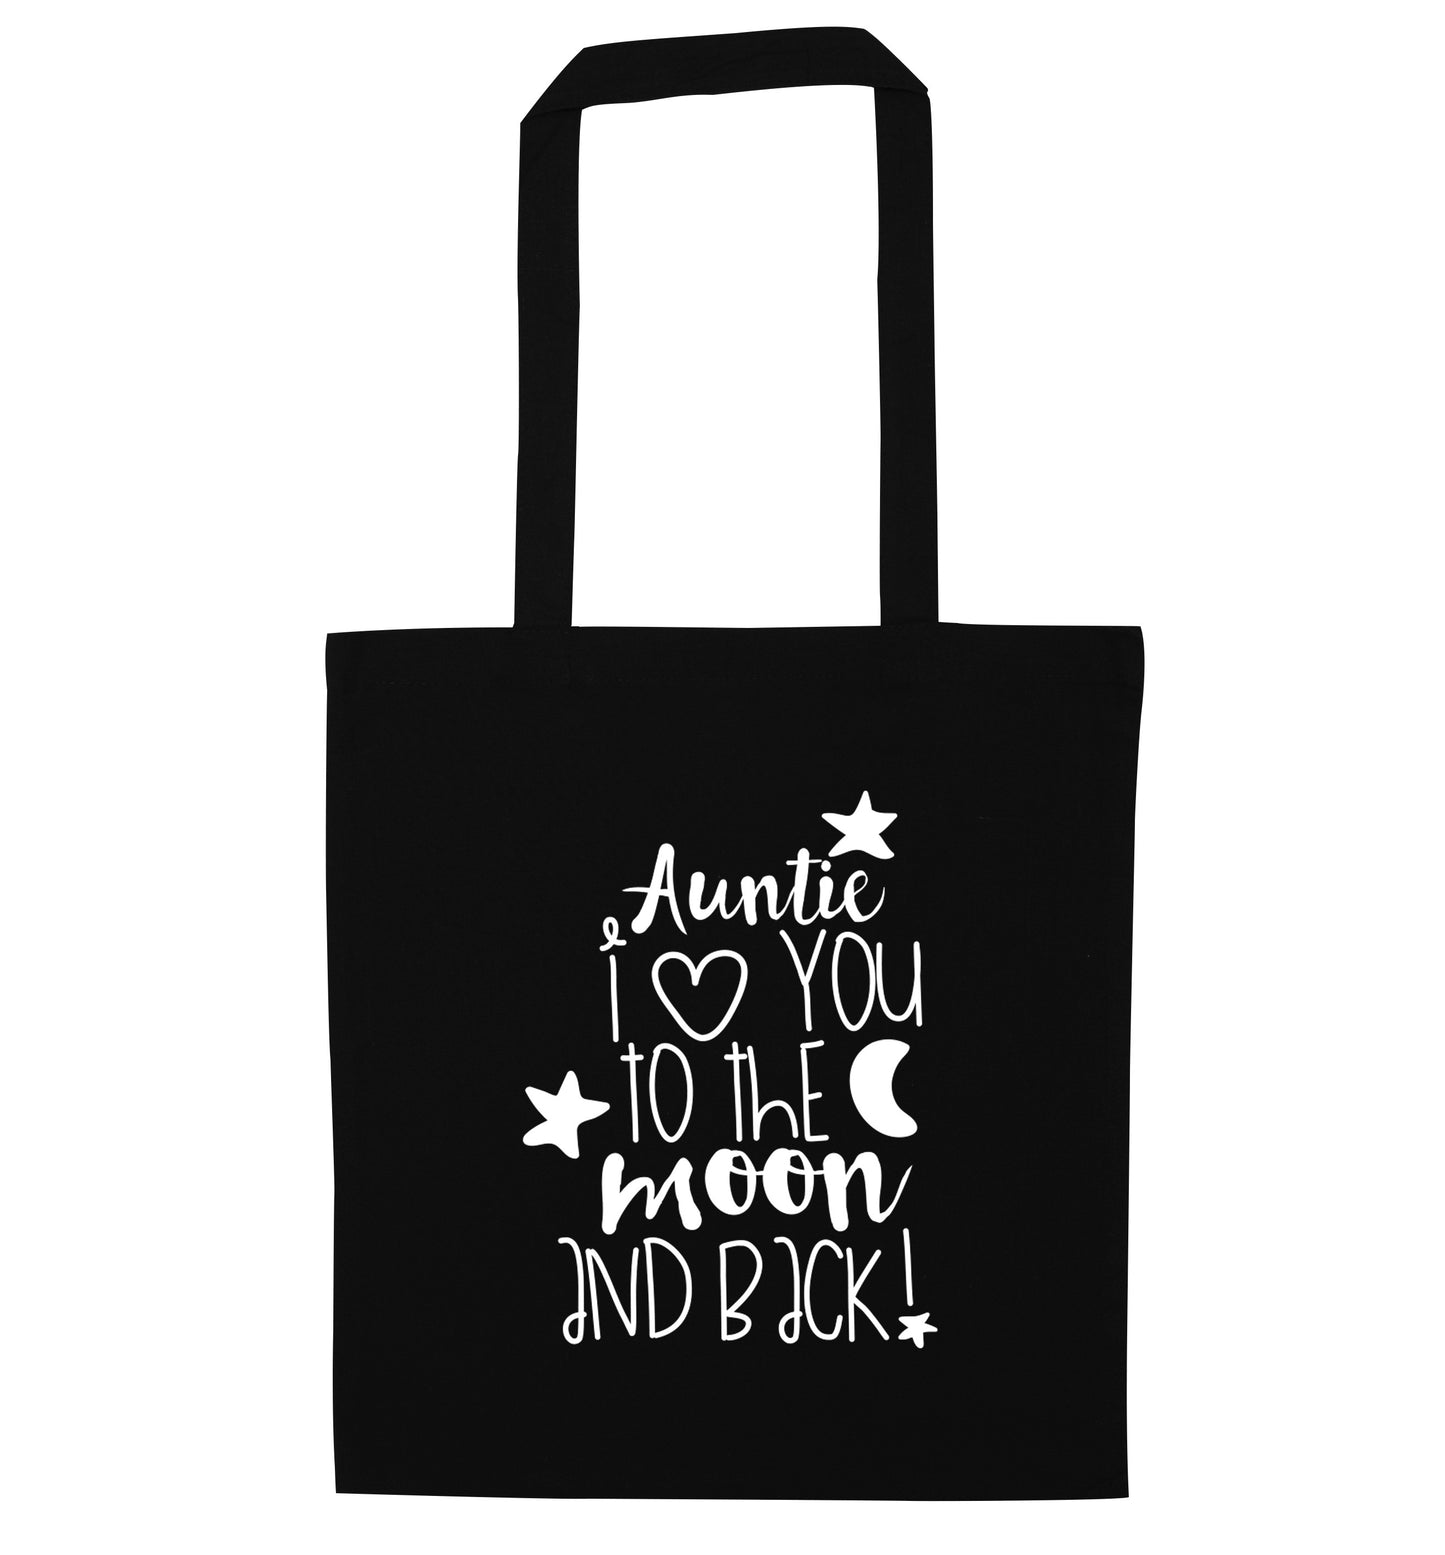 Auntie I love you to the moon and back black tote bag